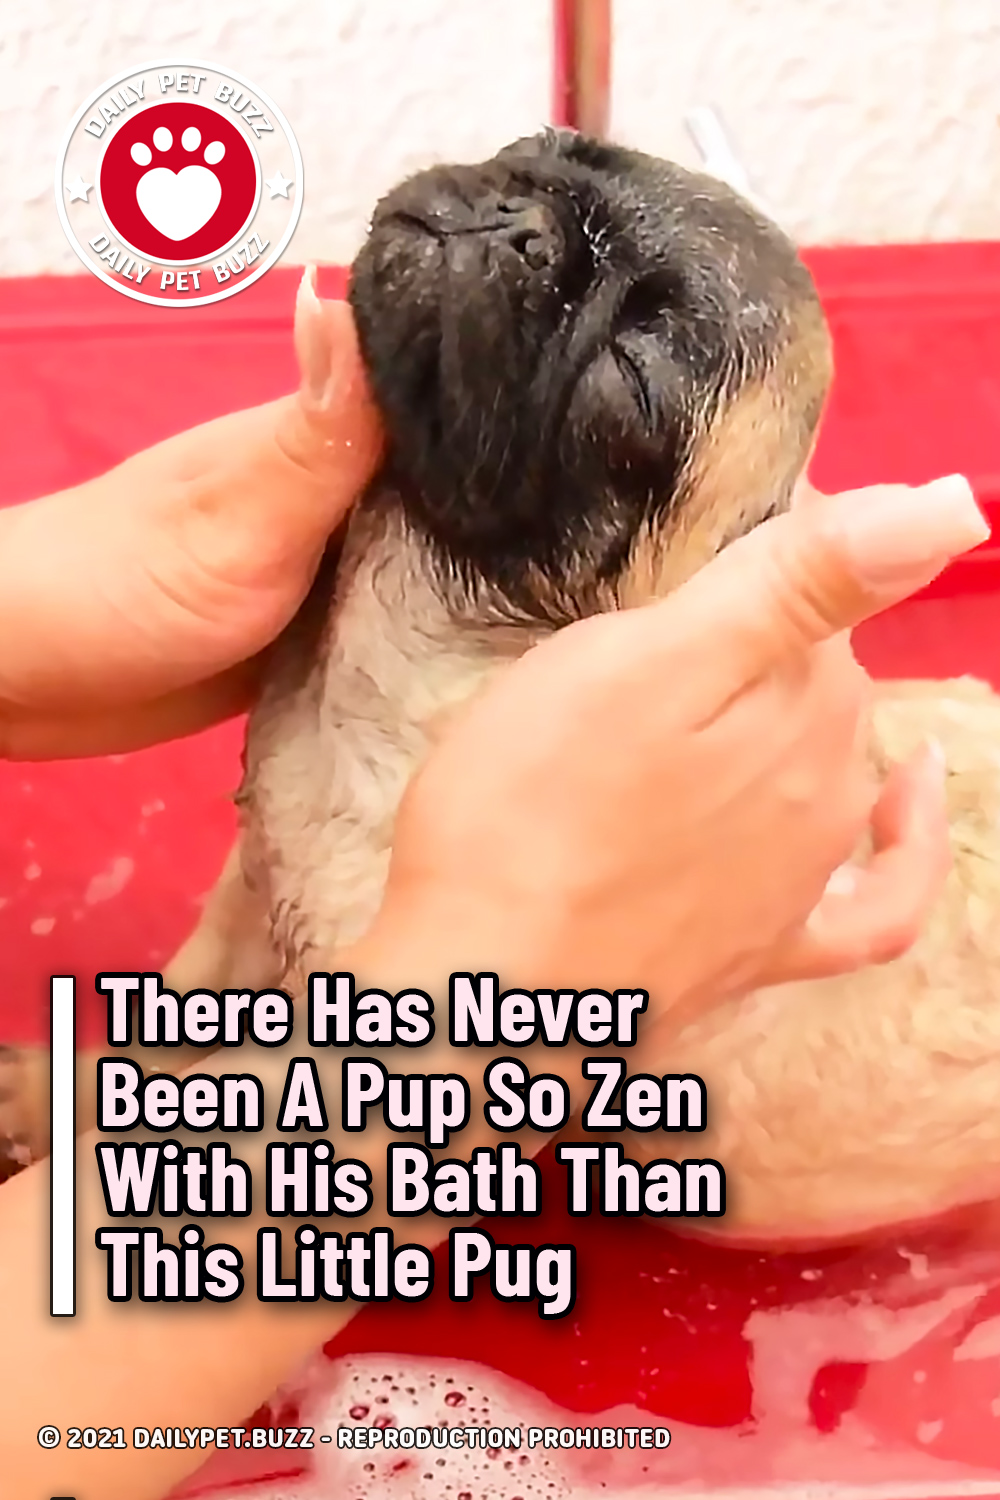 There Has Never Been A Pup So Zen With His Bath Than This Little Pug